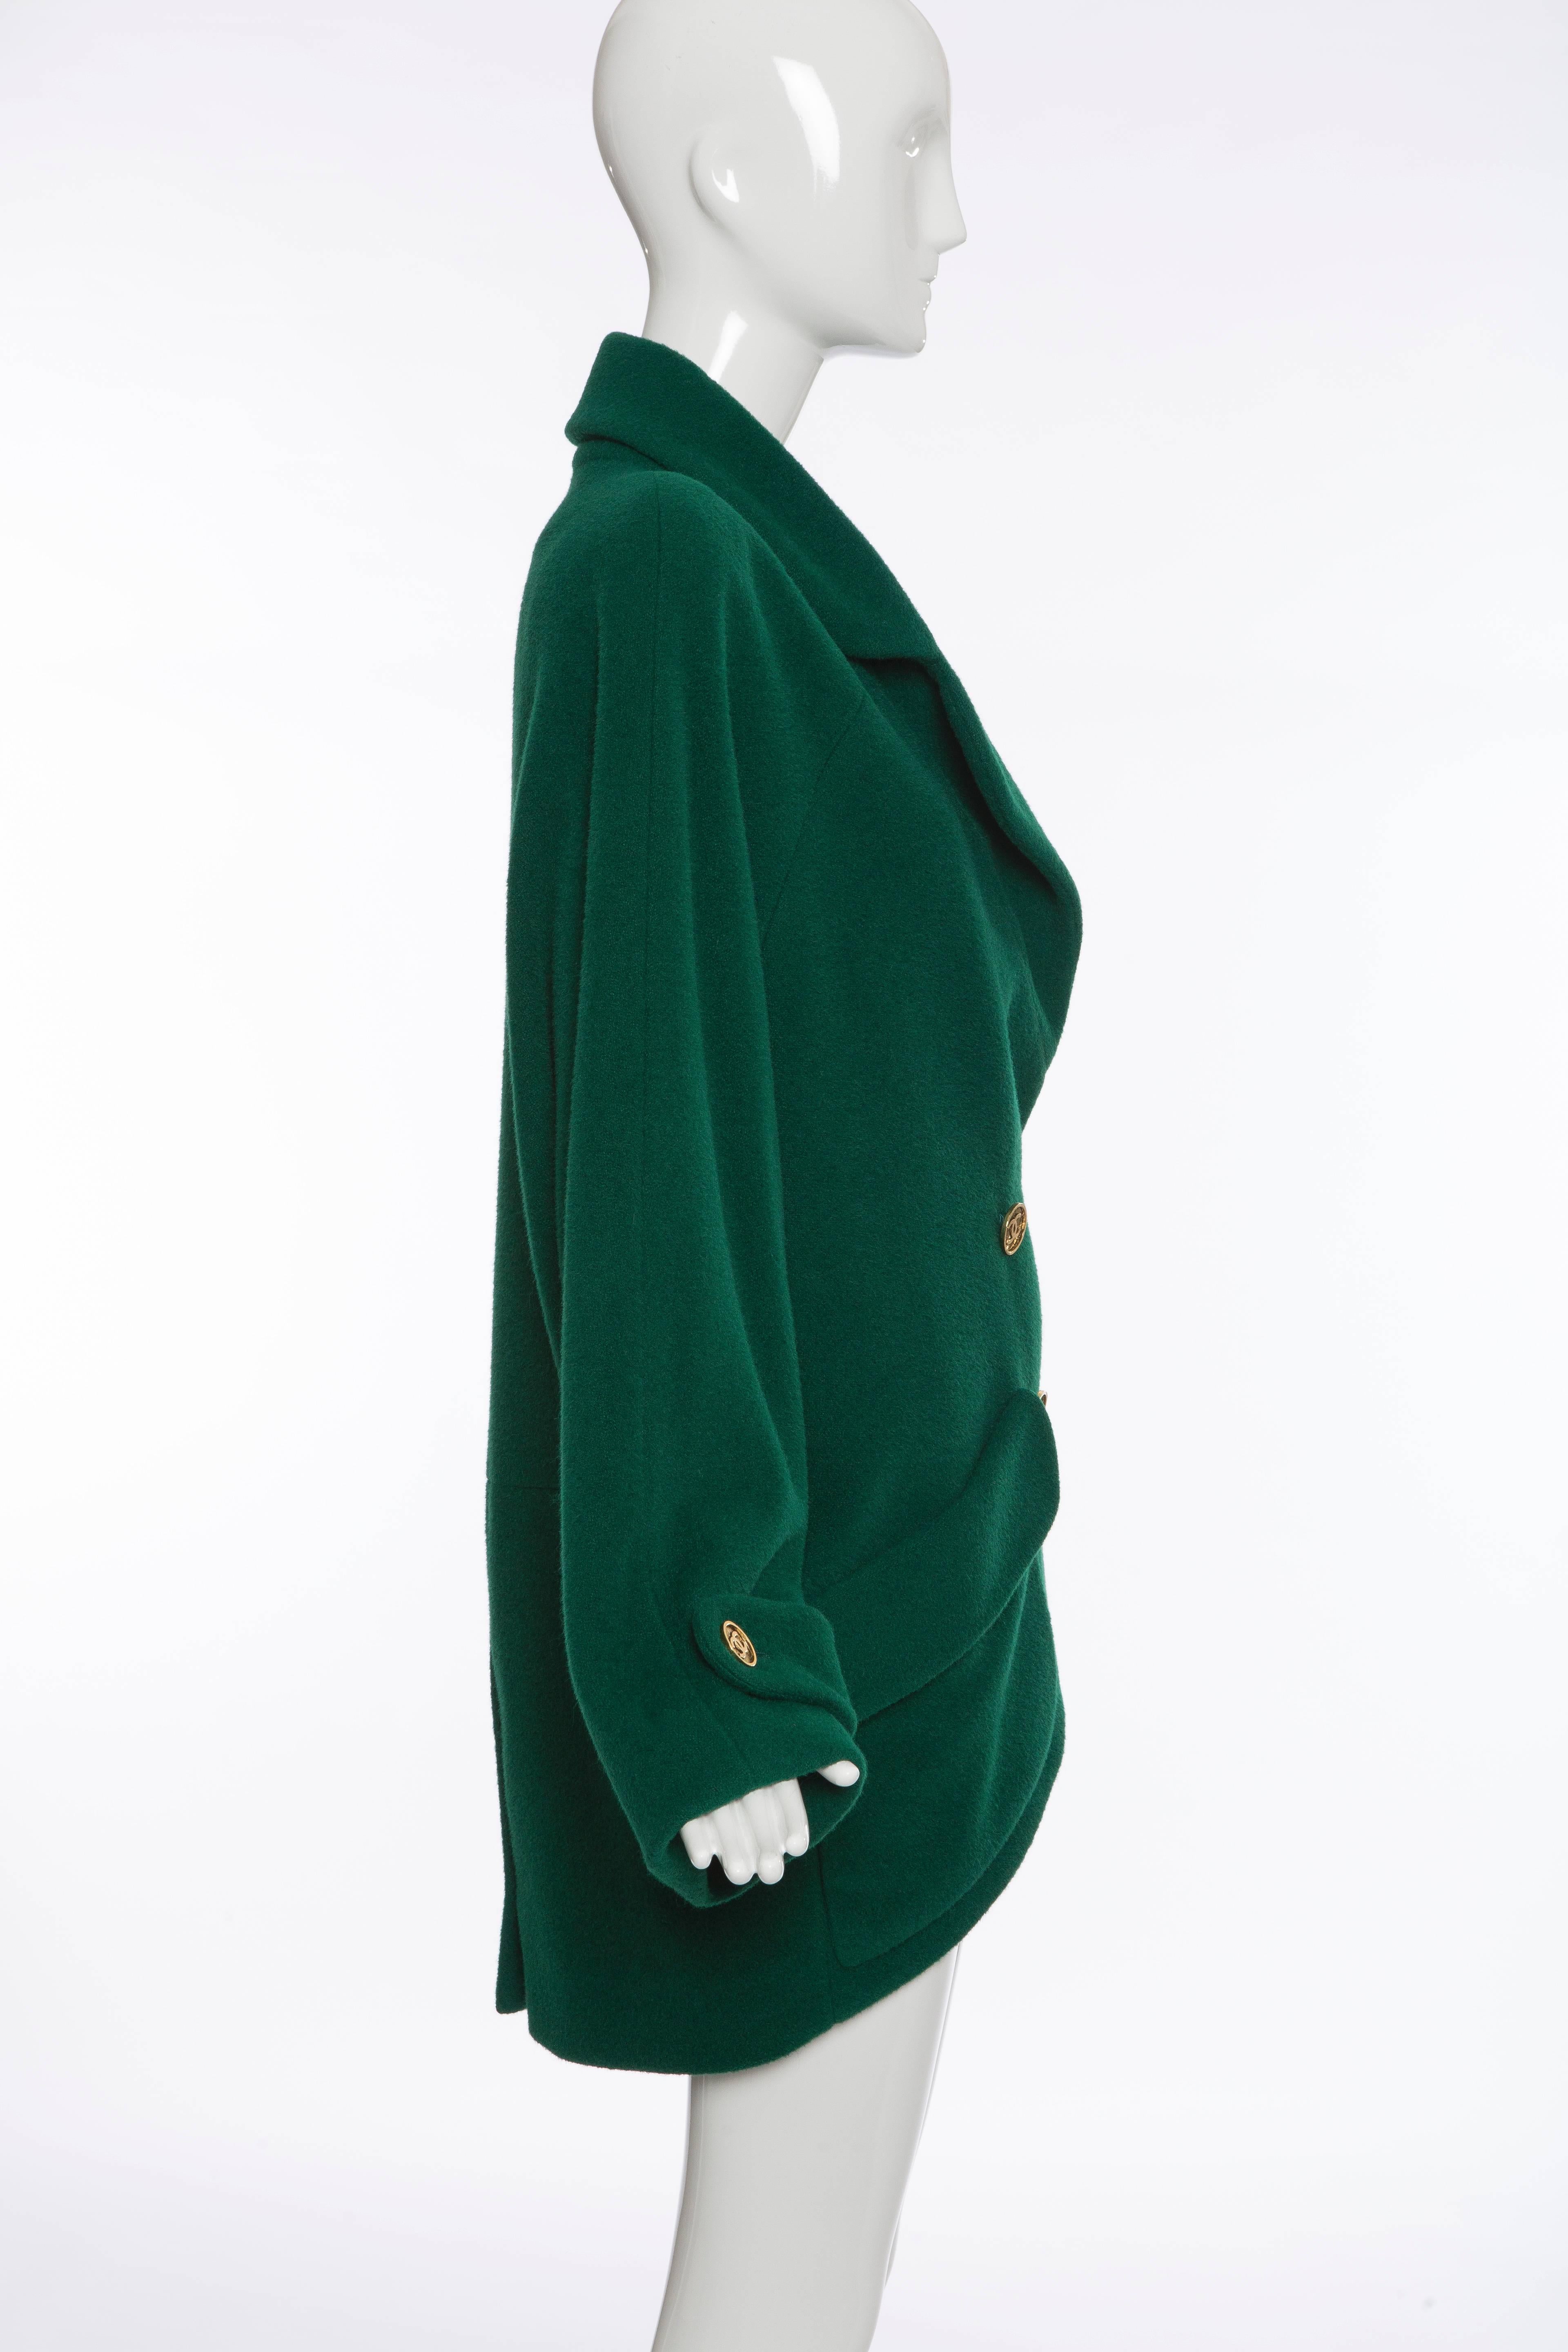 Chanel , circa 1980's, emerald green double-breasted cocoon coat with notched lapels, dual patch pockets, straps at cuffs, gold-tone CC buttons, back single vent and fully lined in silk.

Size not listed, estimated from measurements.

Bust 40”,